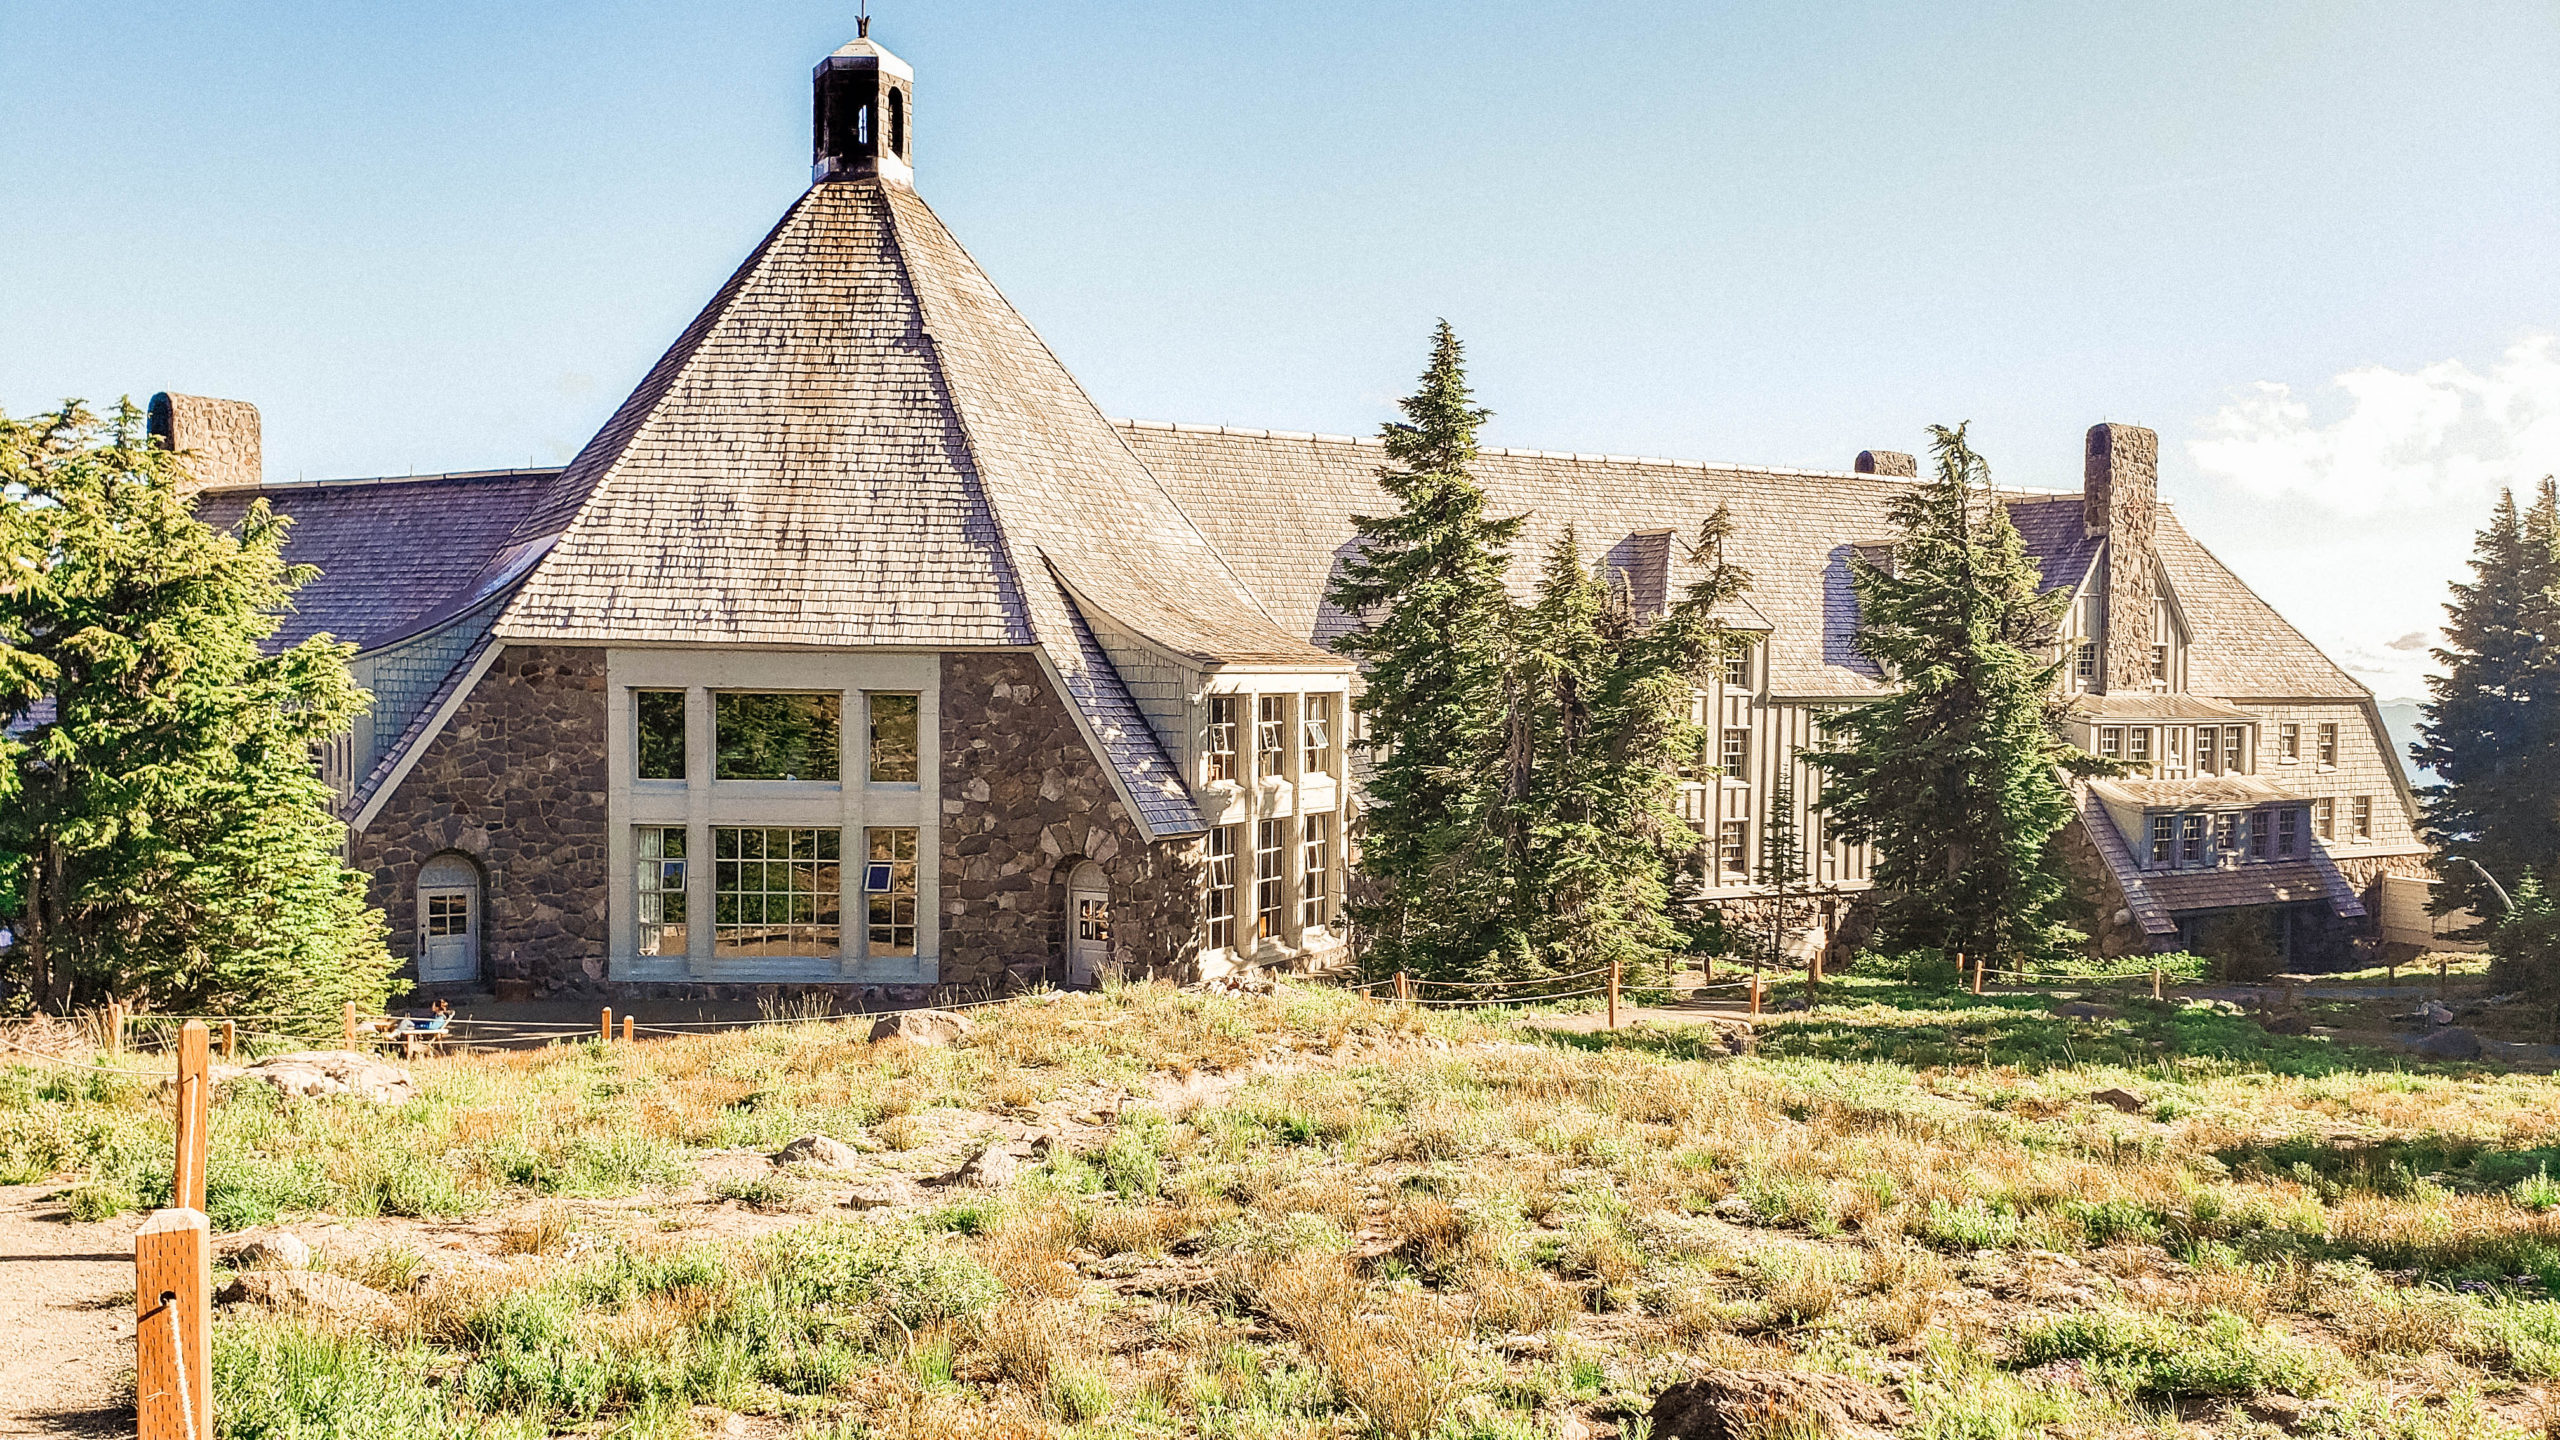 Timberline Lodge, places to visit in Oregon